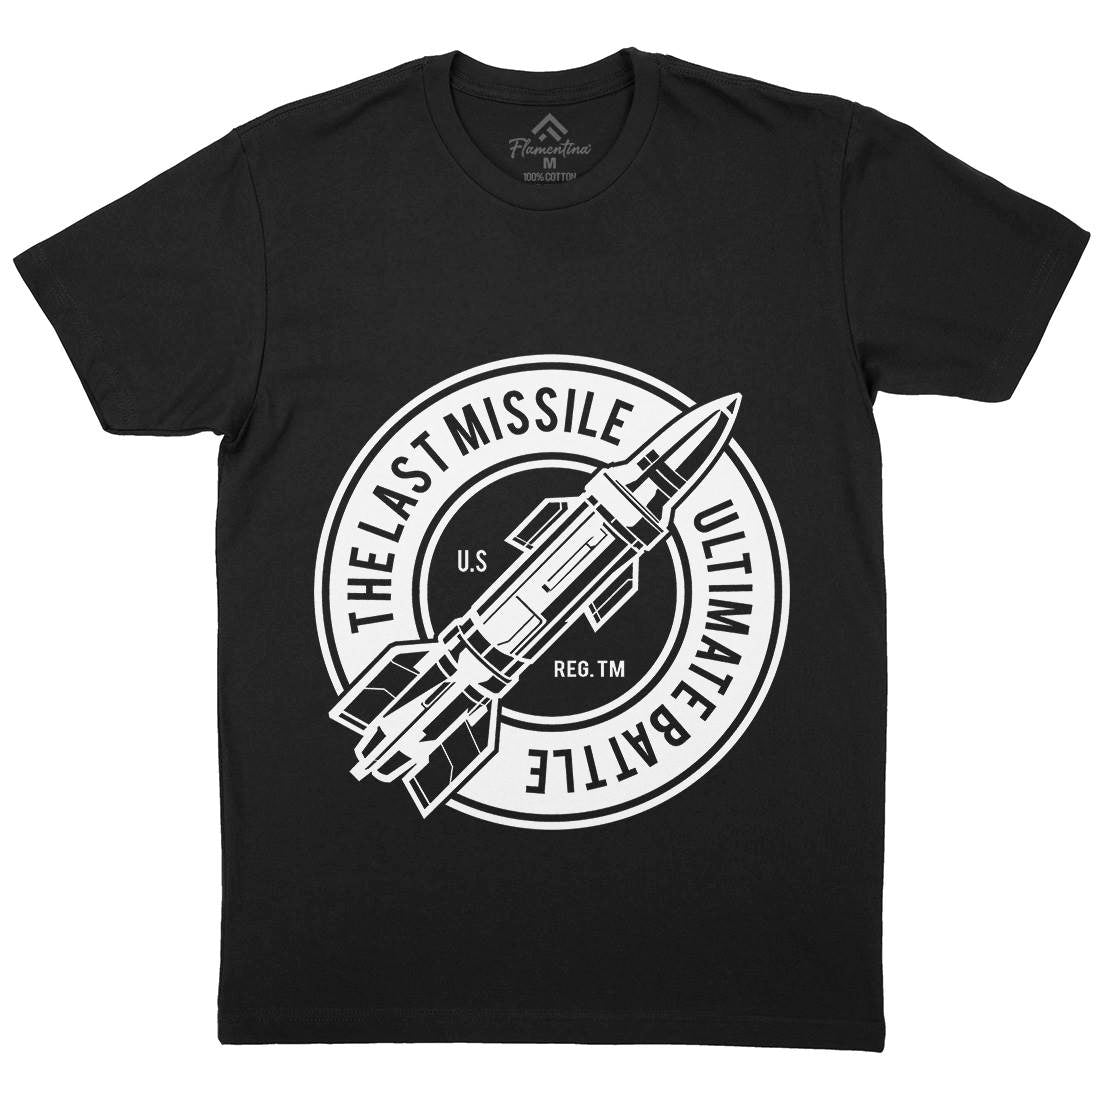 Last Missile Mens Organic Crew Neck T-Shirt Army A175